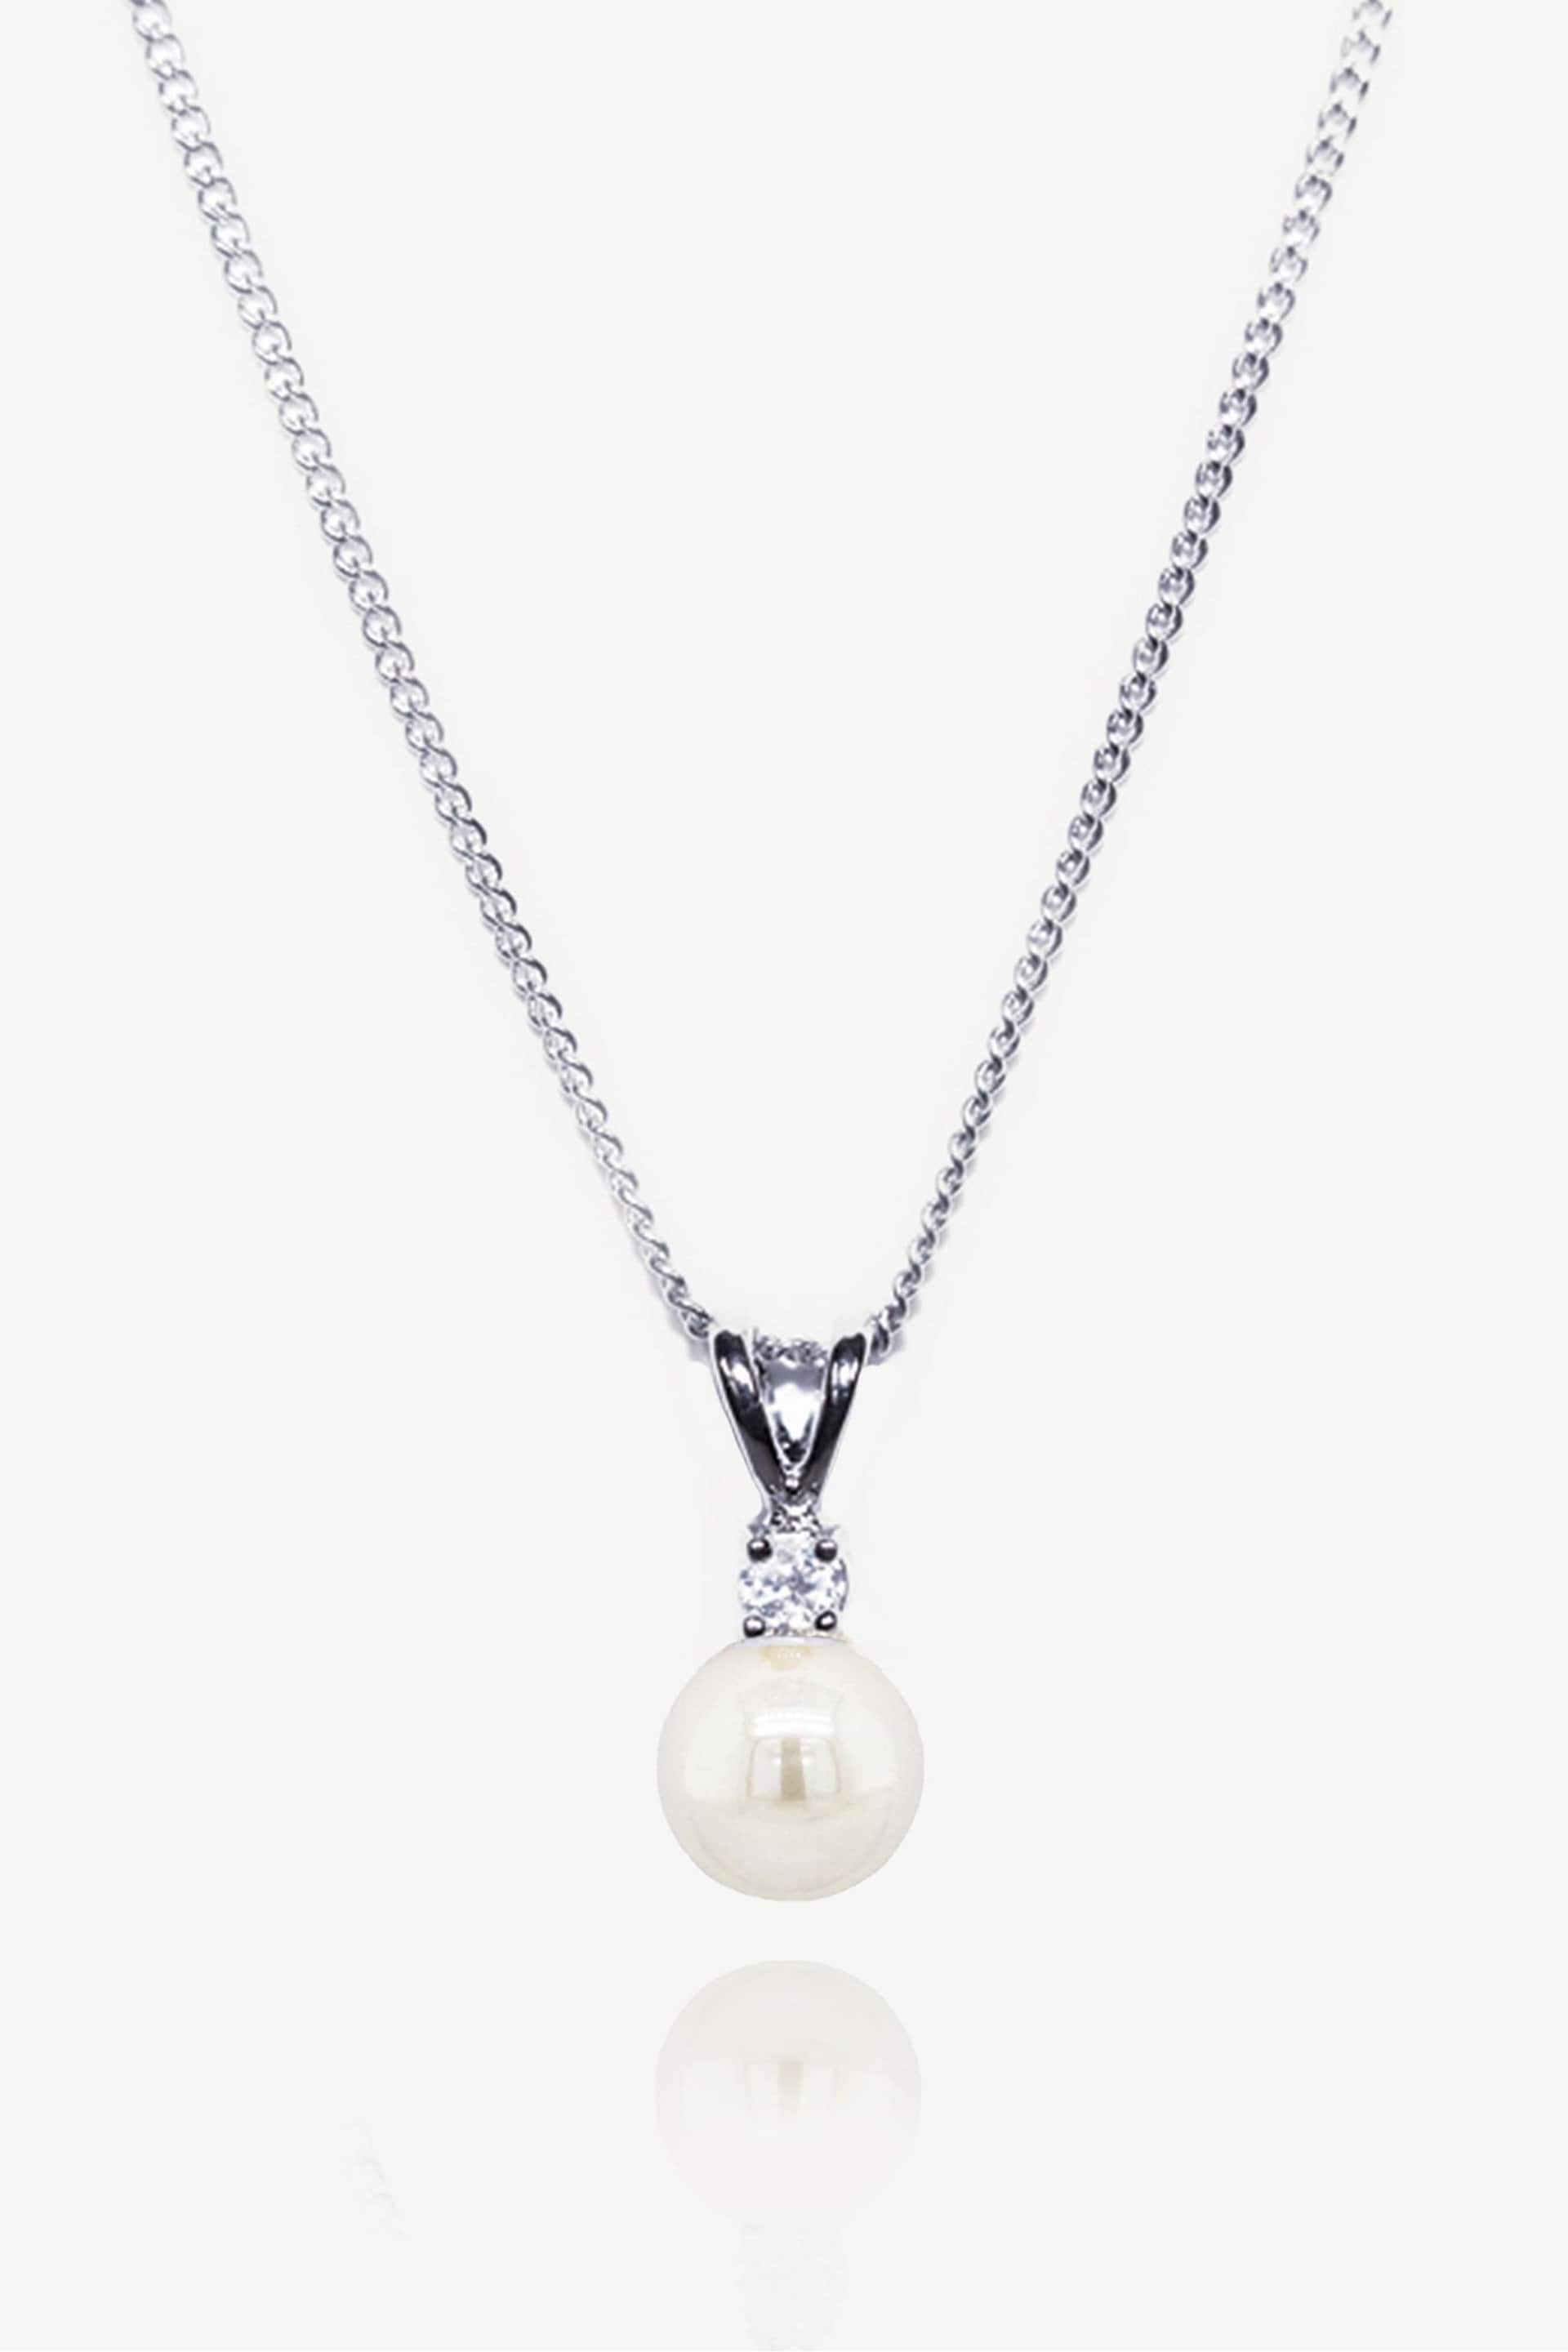 Ivory & Co Silver Classic Crystal And Pearl Pendant - Image 1 of 4